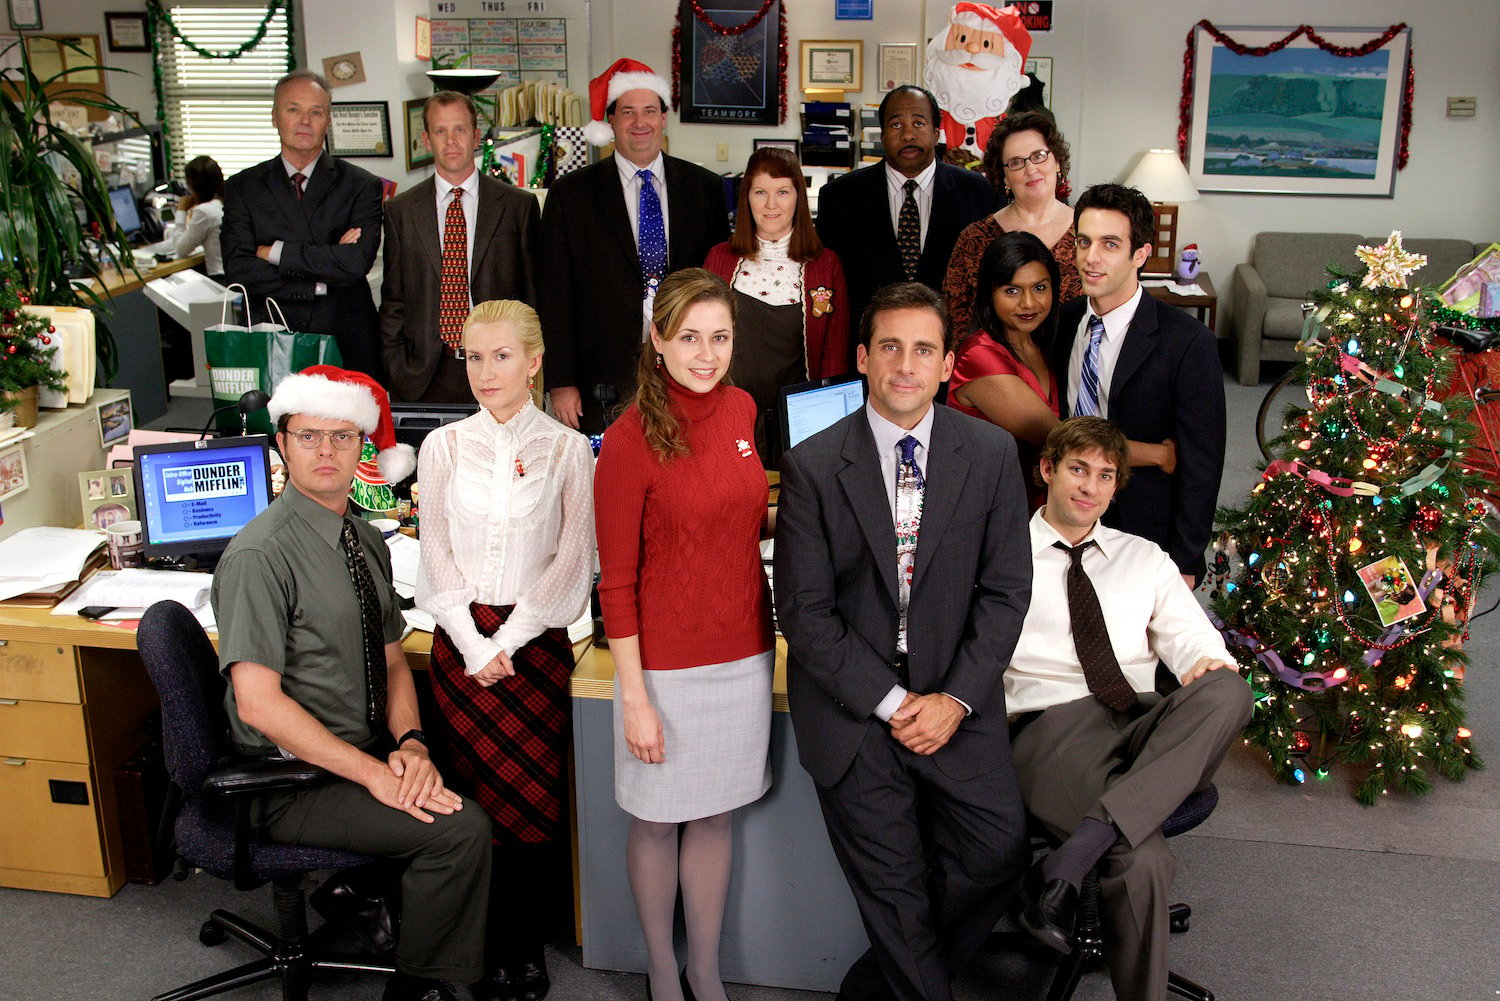 The Office': Steve Carell Improvised 1 Iconic Moment That Became a Popular  Meme